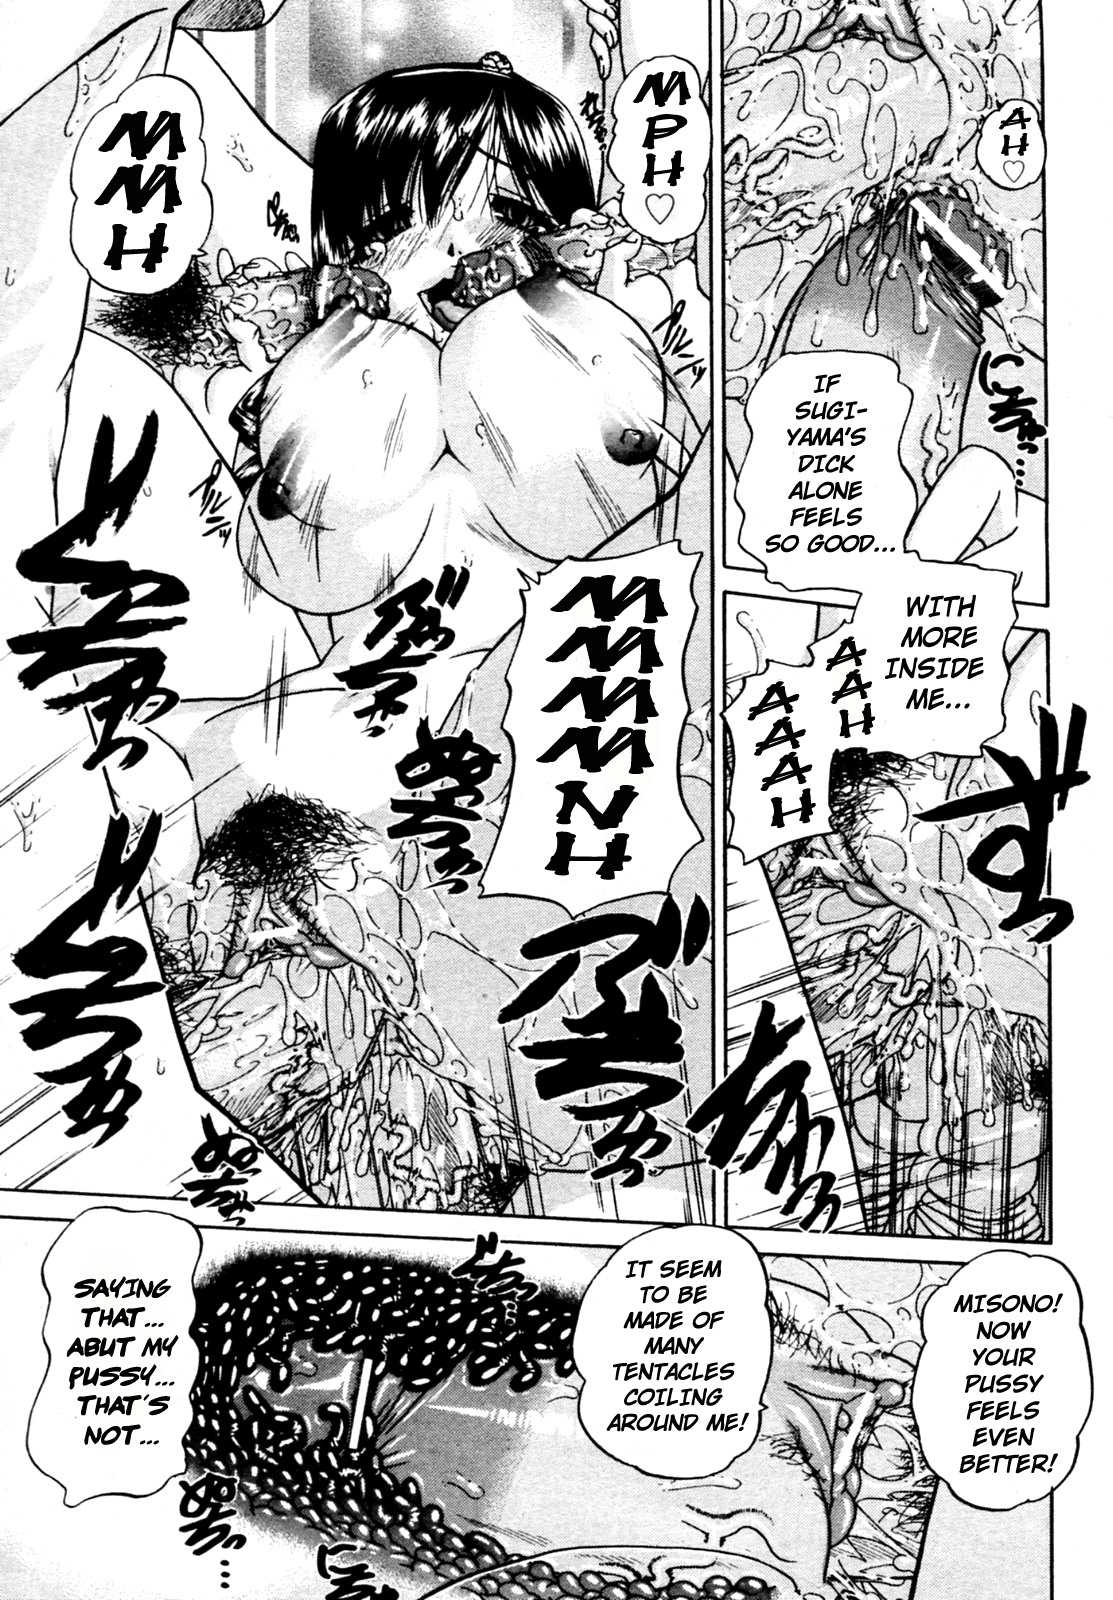 [Chun Rou Zan] It All Started With Our First Orgy + bonus comic sequel [English] [春籠漸] それは、乱交から初じまった